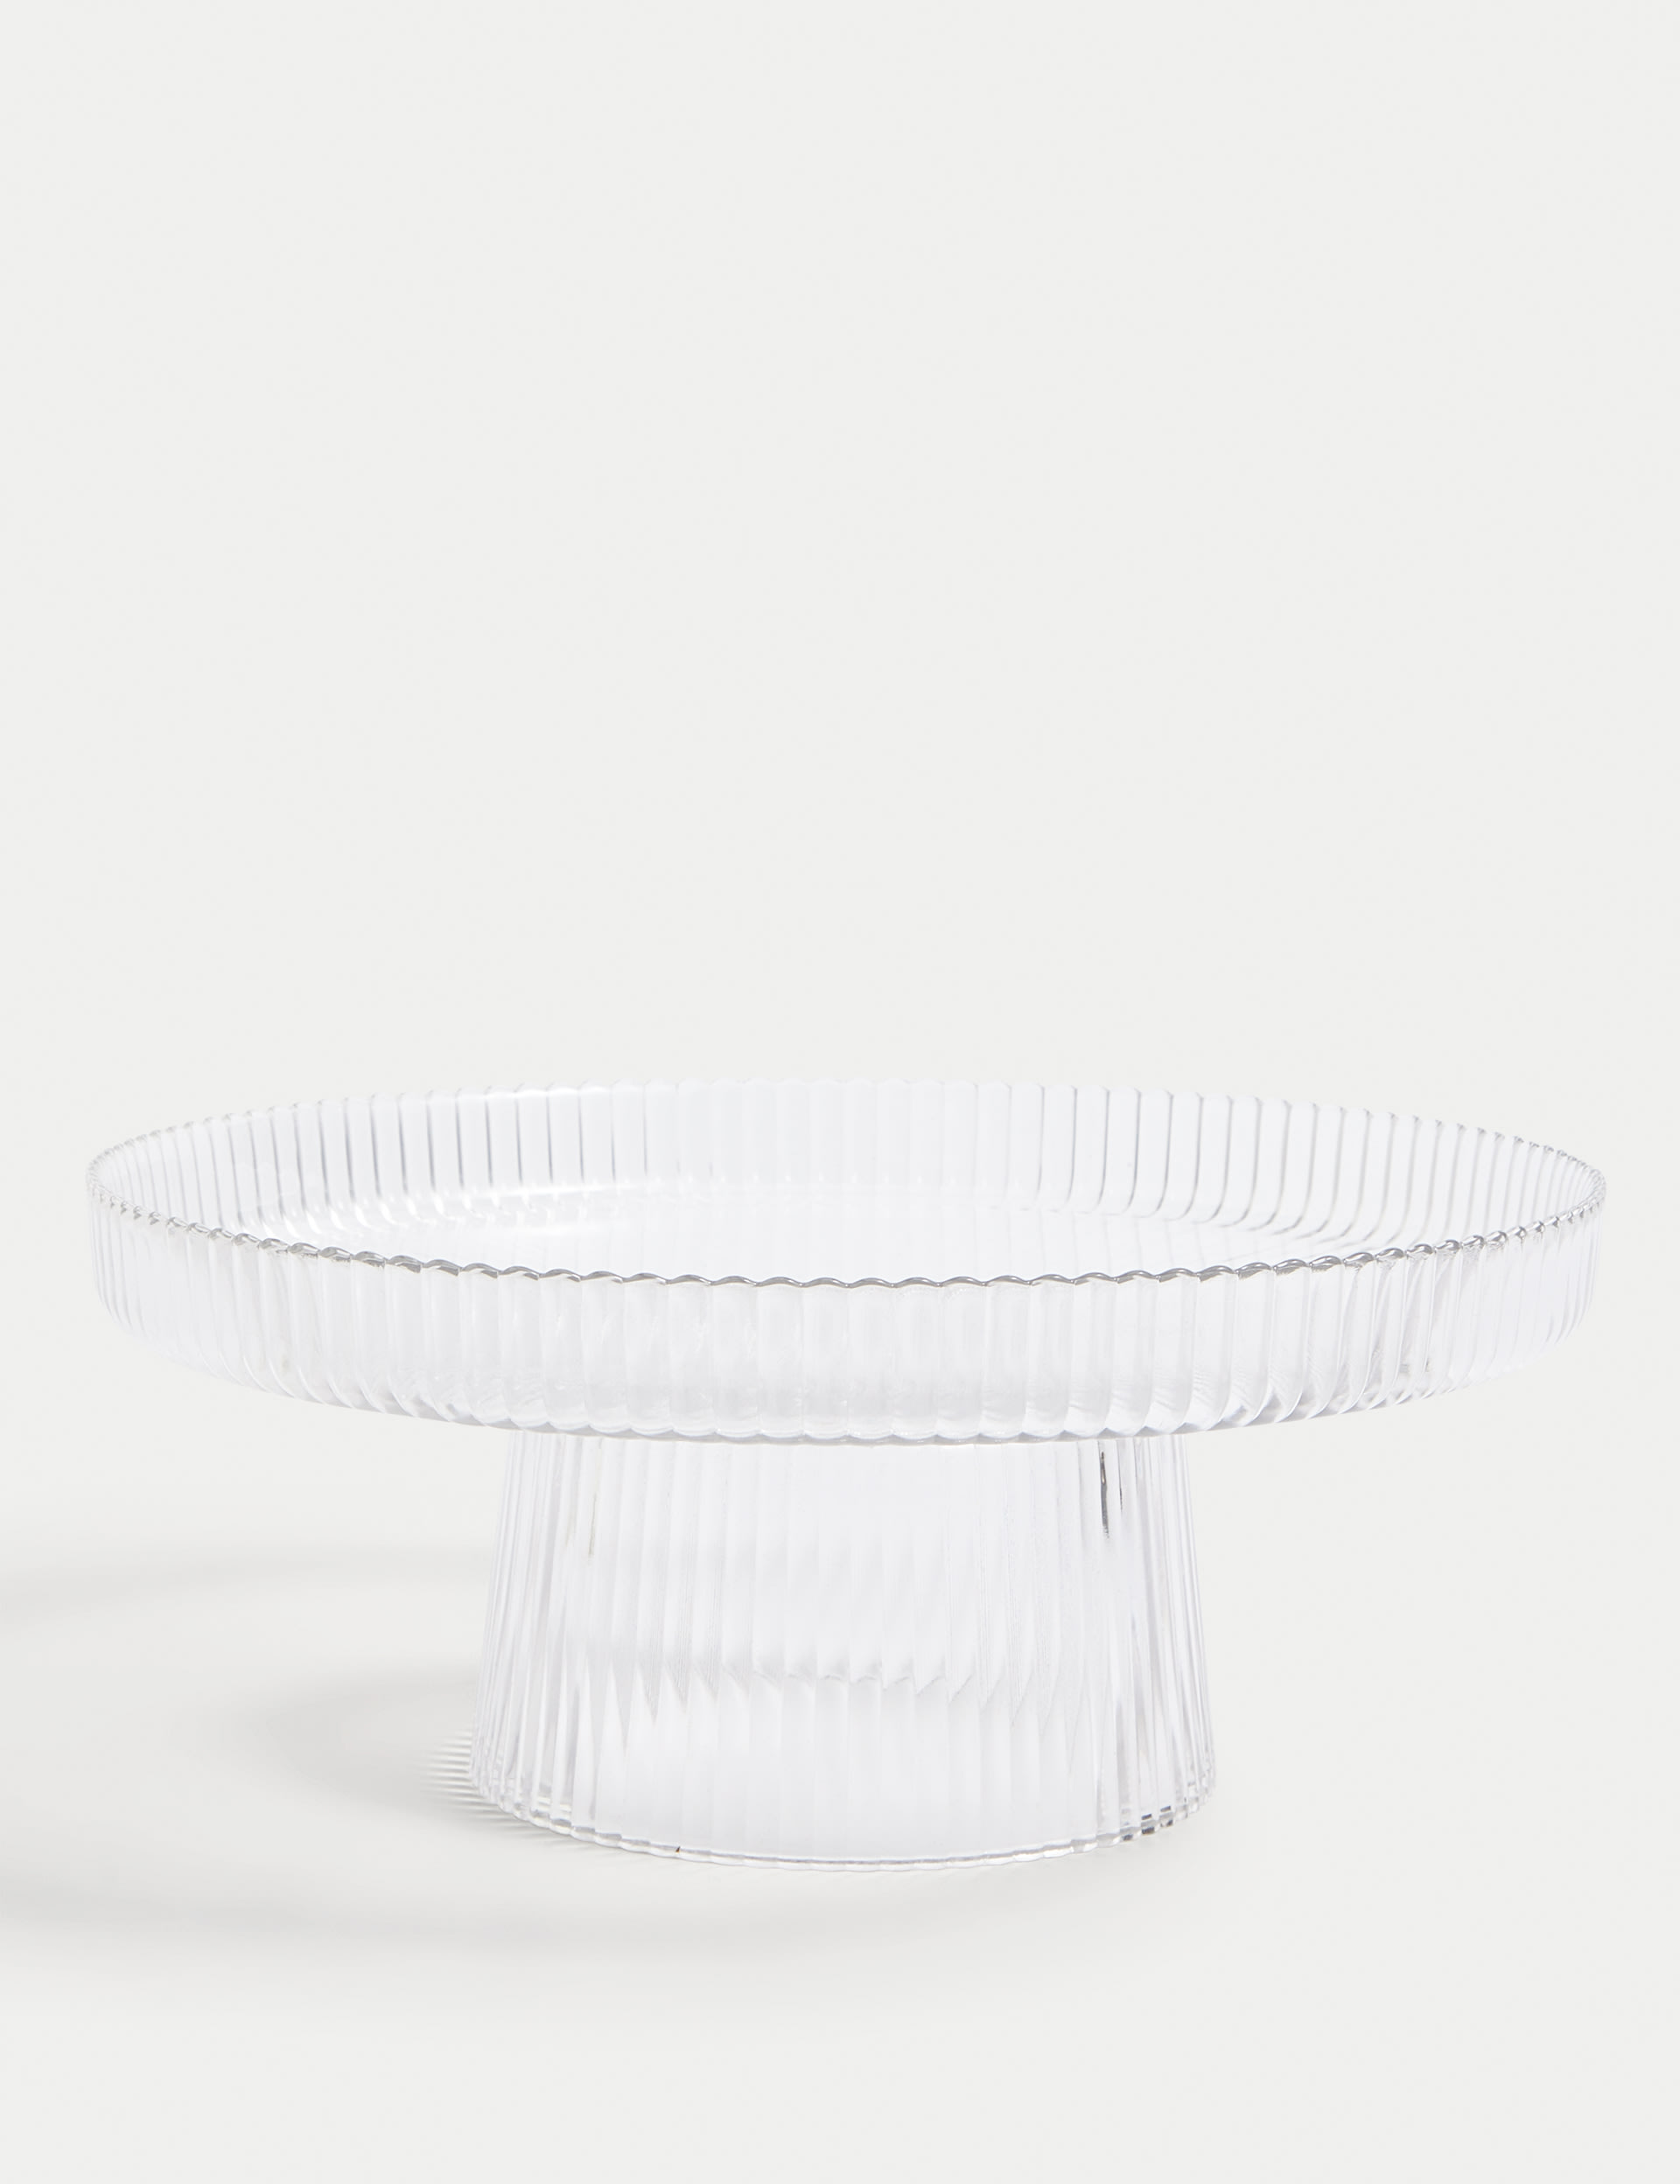 Glass Ribbed Cake Stand 1 of 4